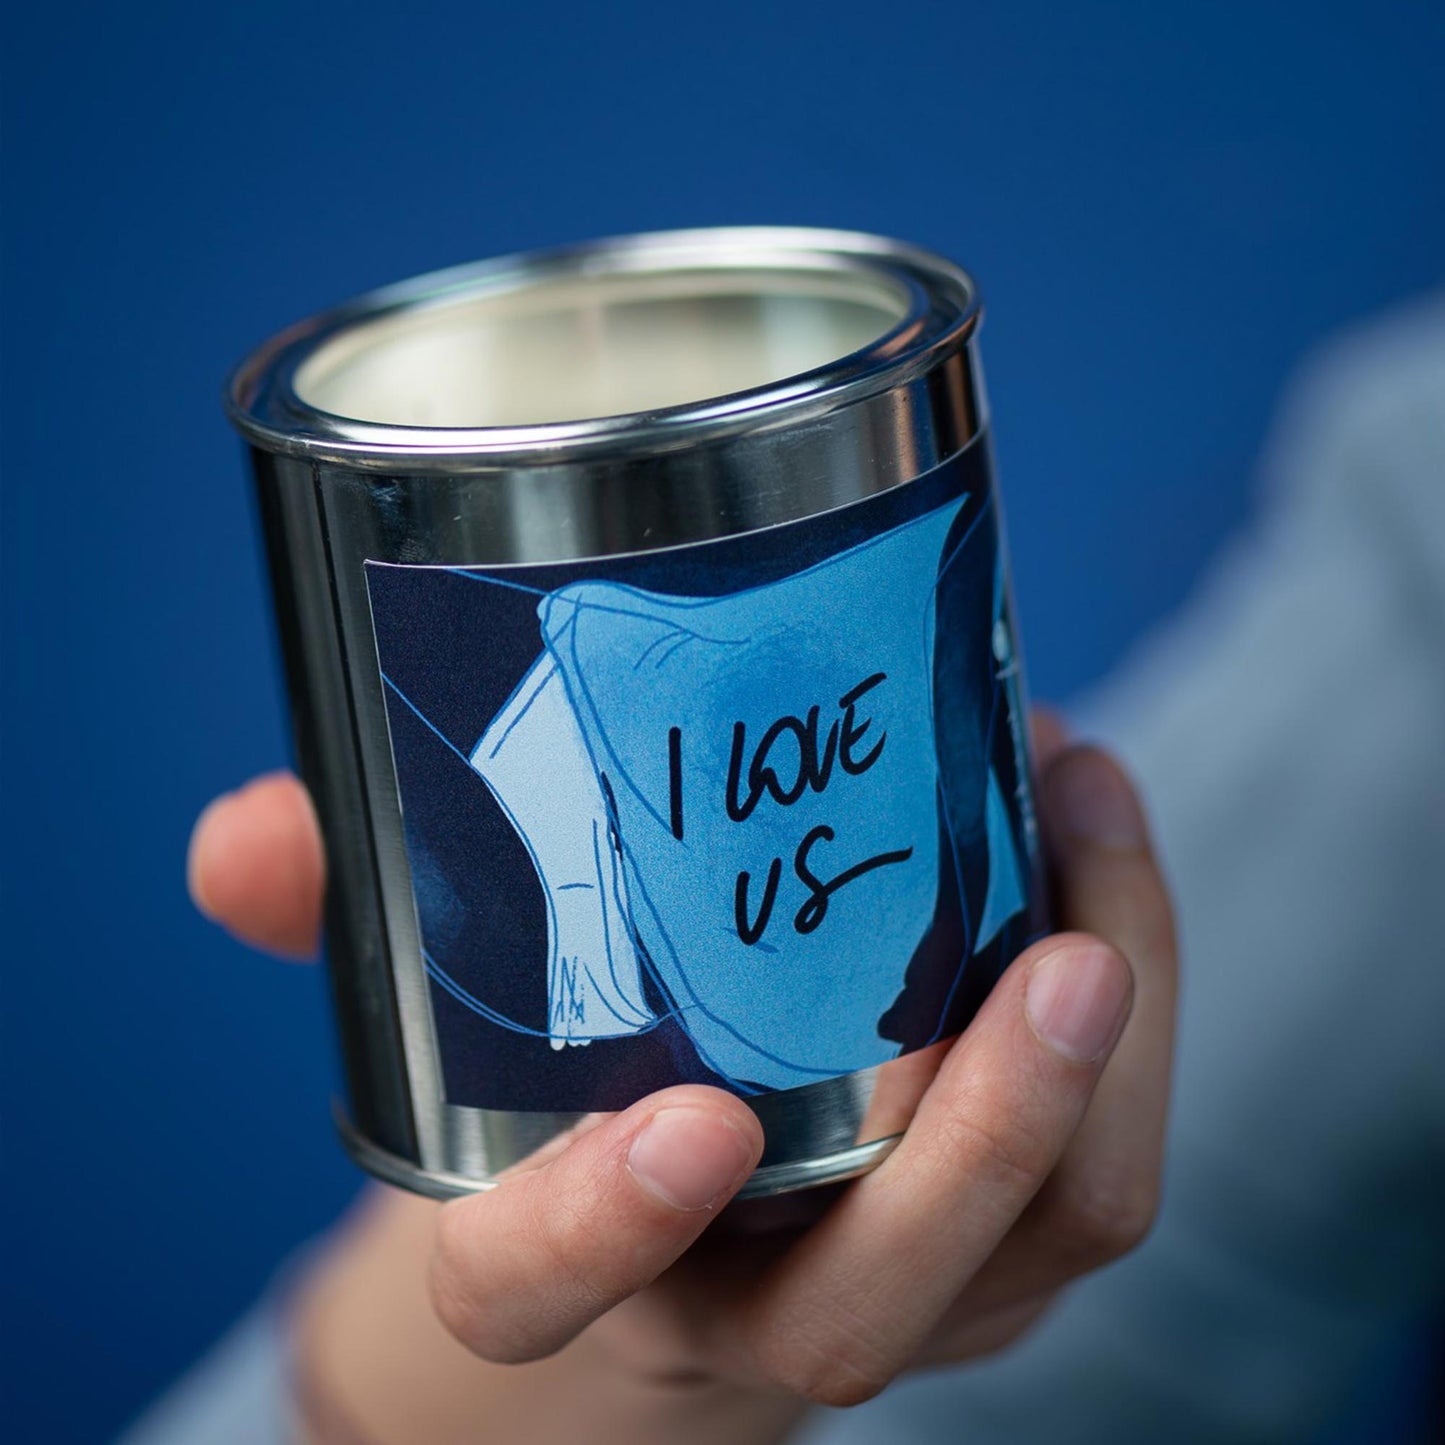 "I love us" soy wax candle in a metal can